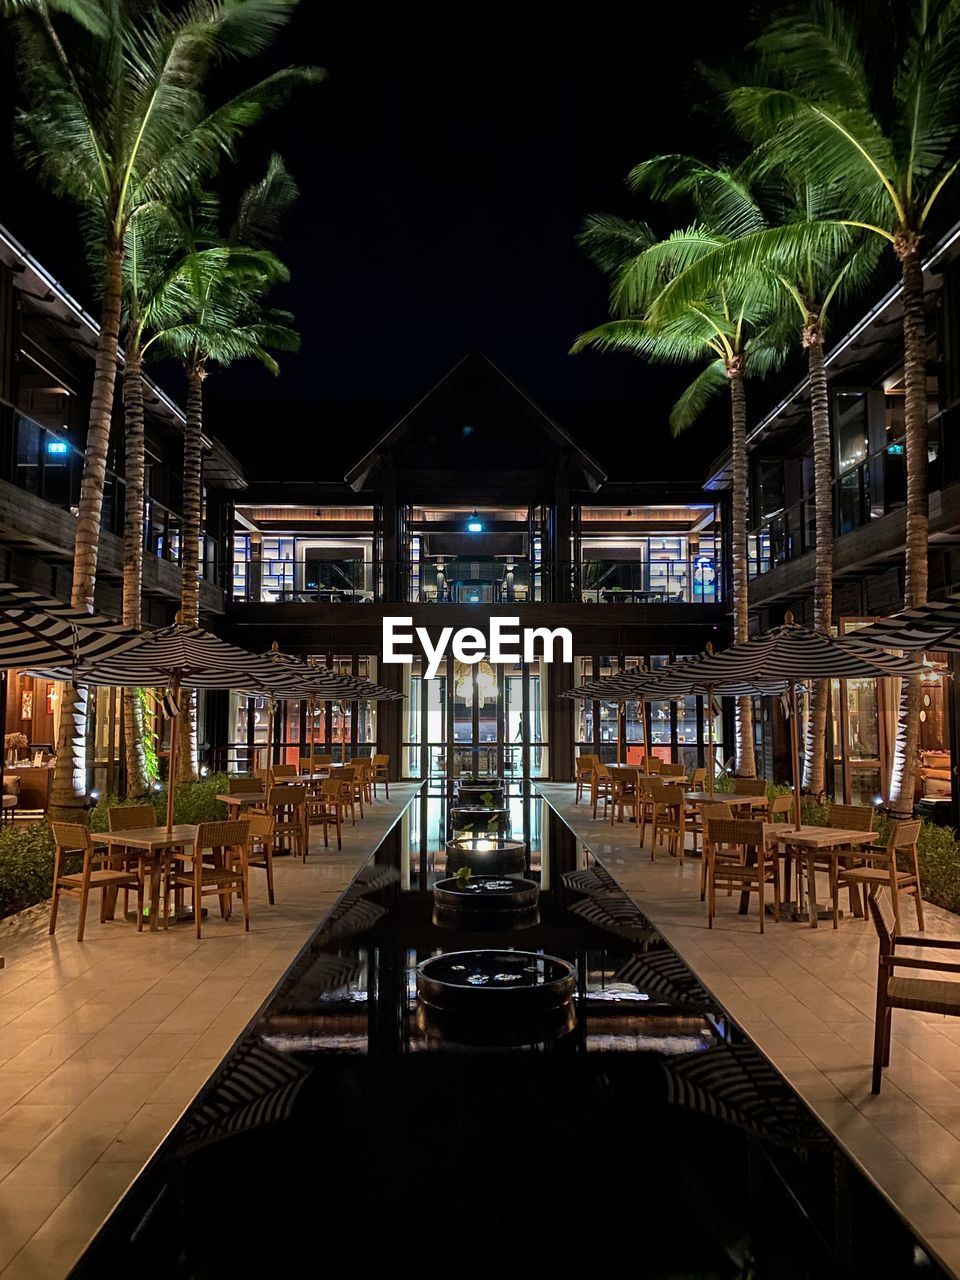 night, architecture, illuminated, built structure, lighting, tropical climate, seat, palm tree, tree, evening, nature, plant, resort, travel destinations, table, building exterior, chair, no people, bar, outdoors, restaurant, building, water, travel, lighting equipment